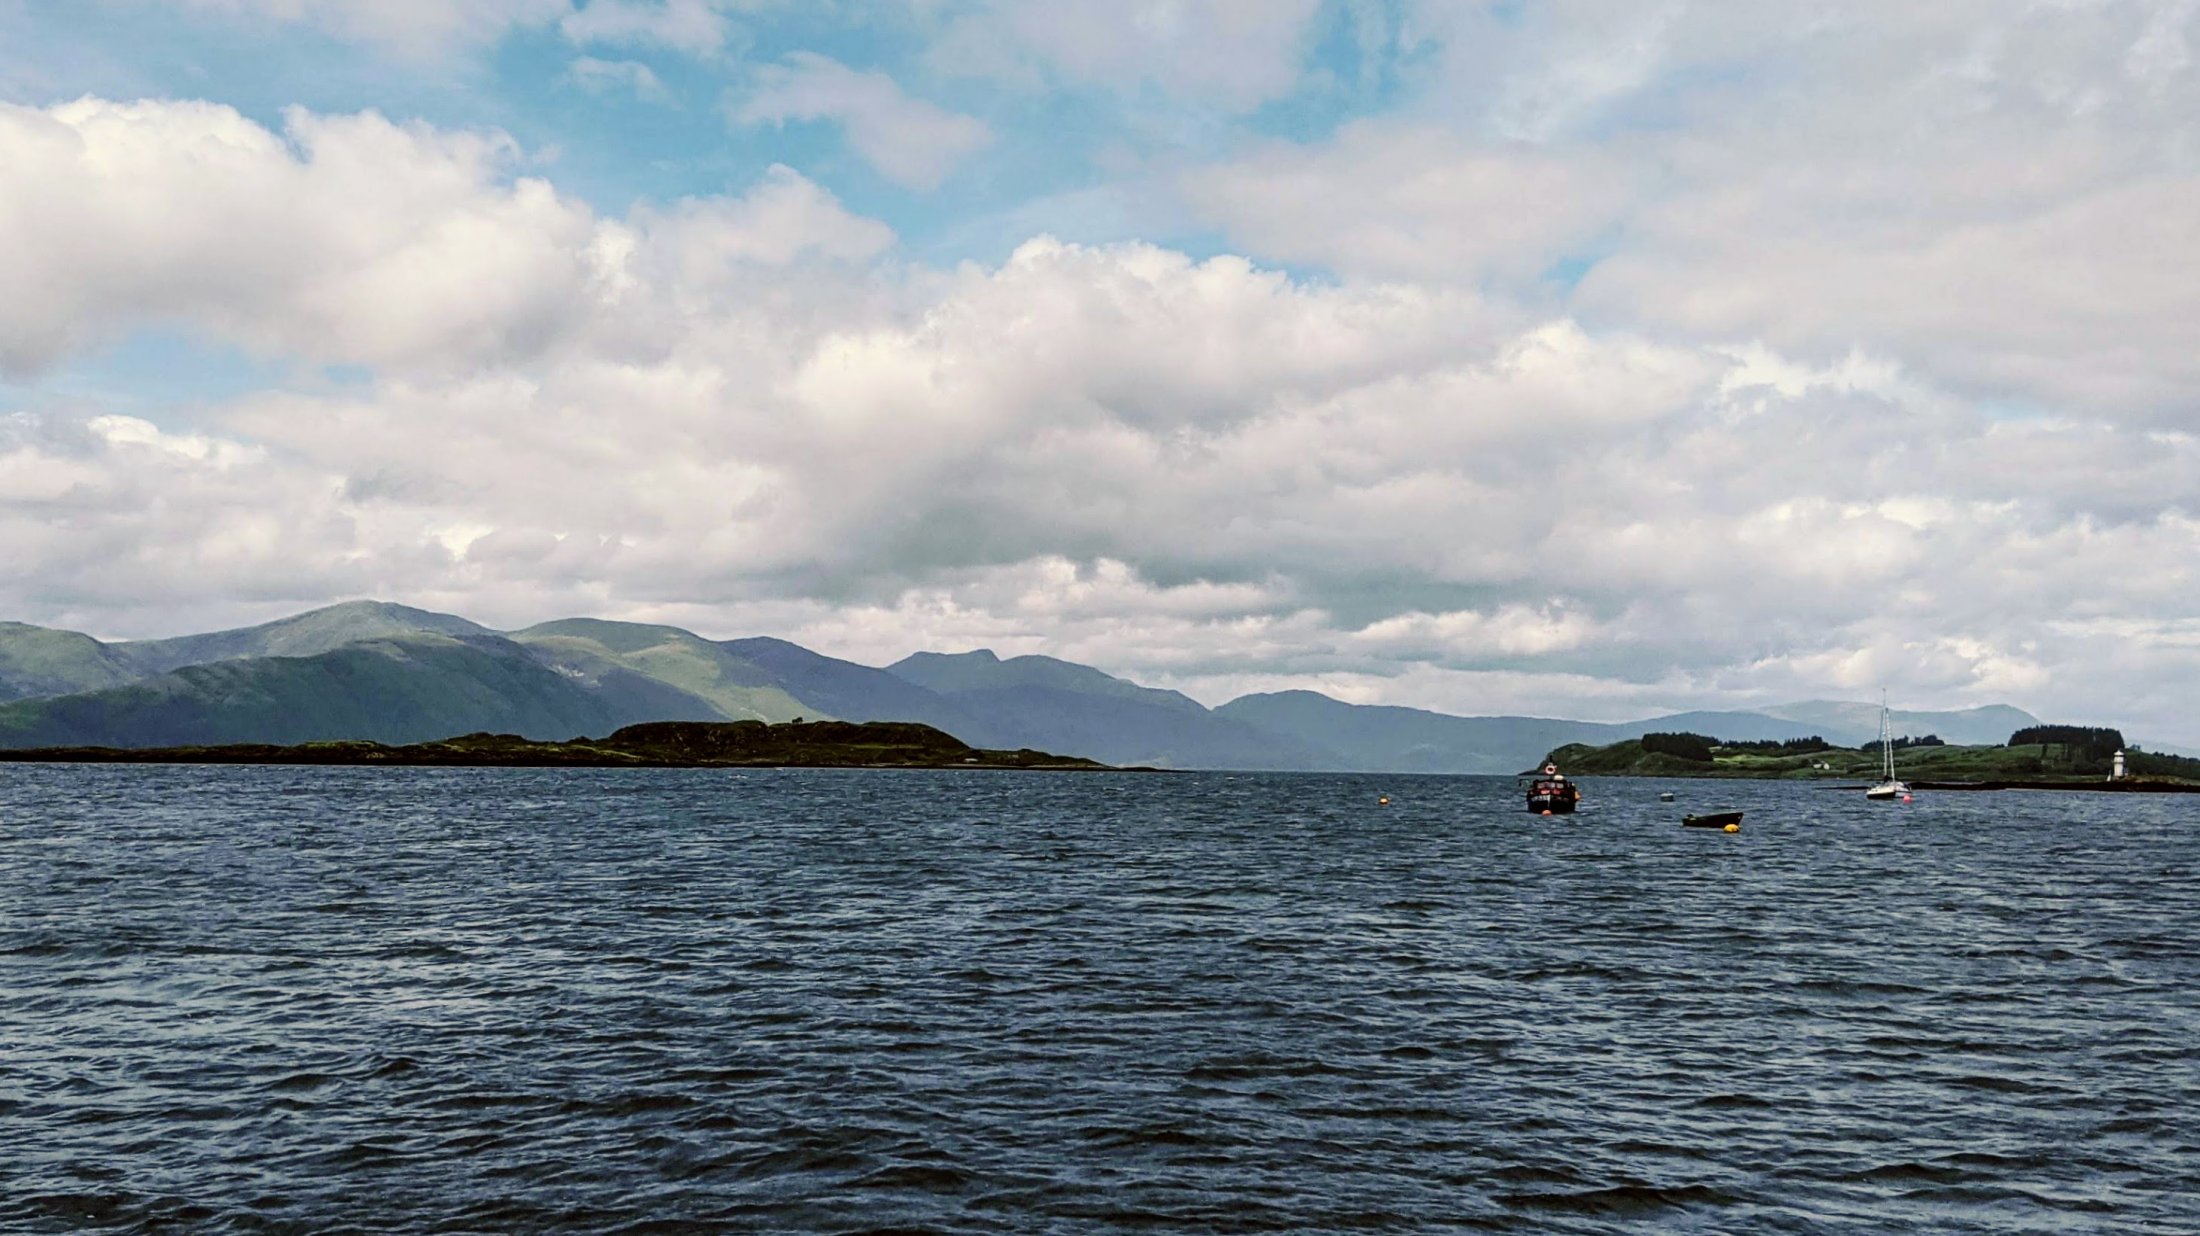 Approaching Port Appin